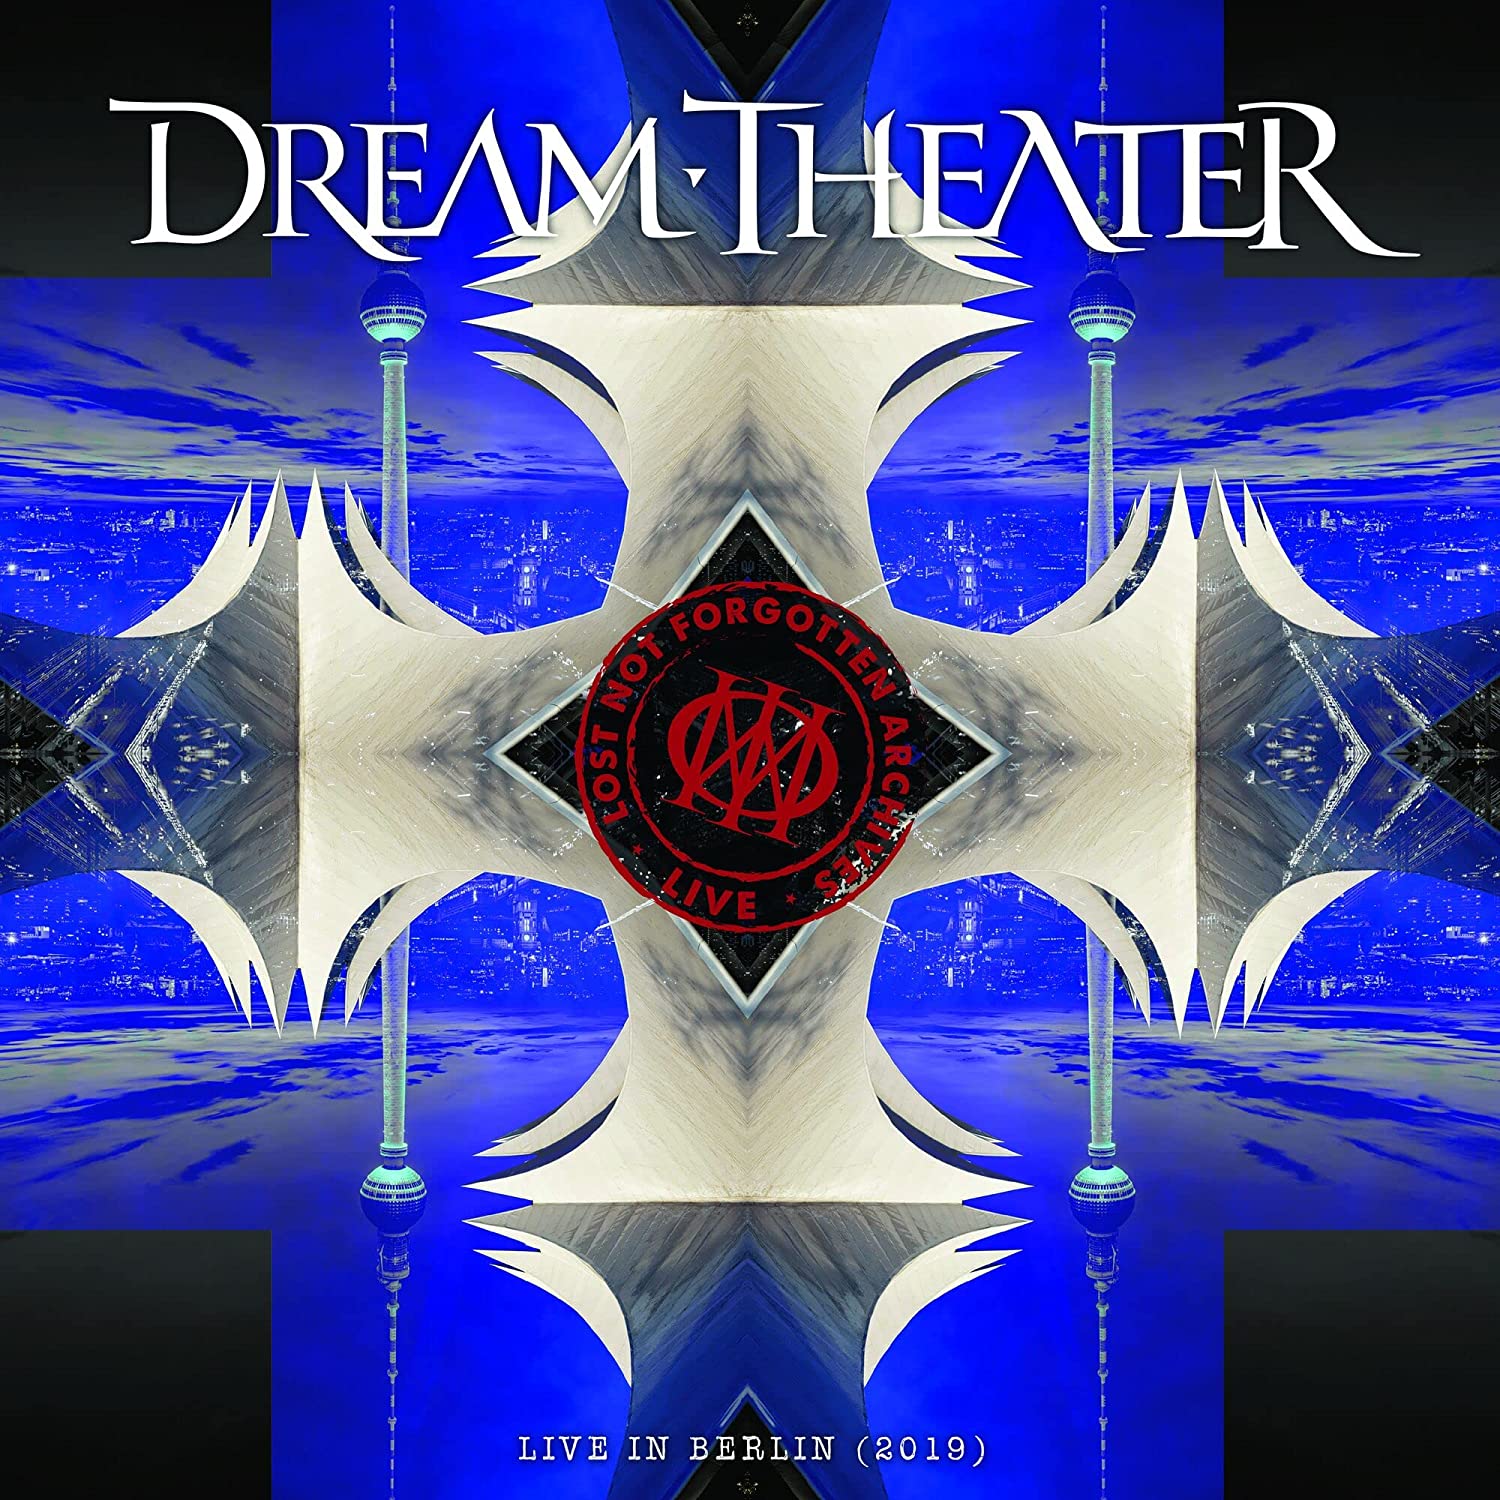 Lost Not Forgotten Archives: Live In Berlin 2019 (2xVinyl + 2xCD) | Dream Theater